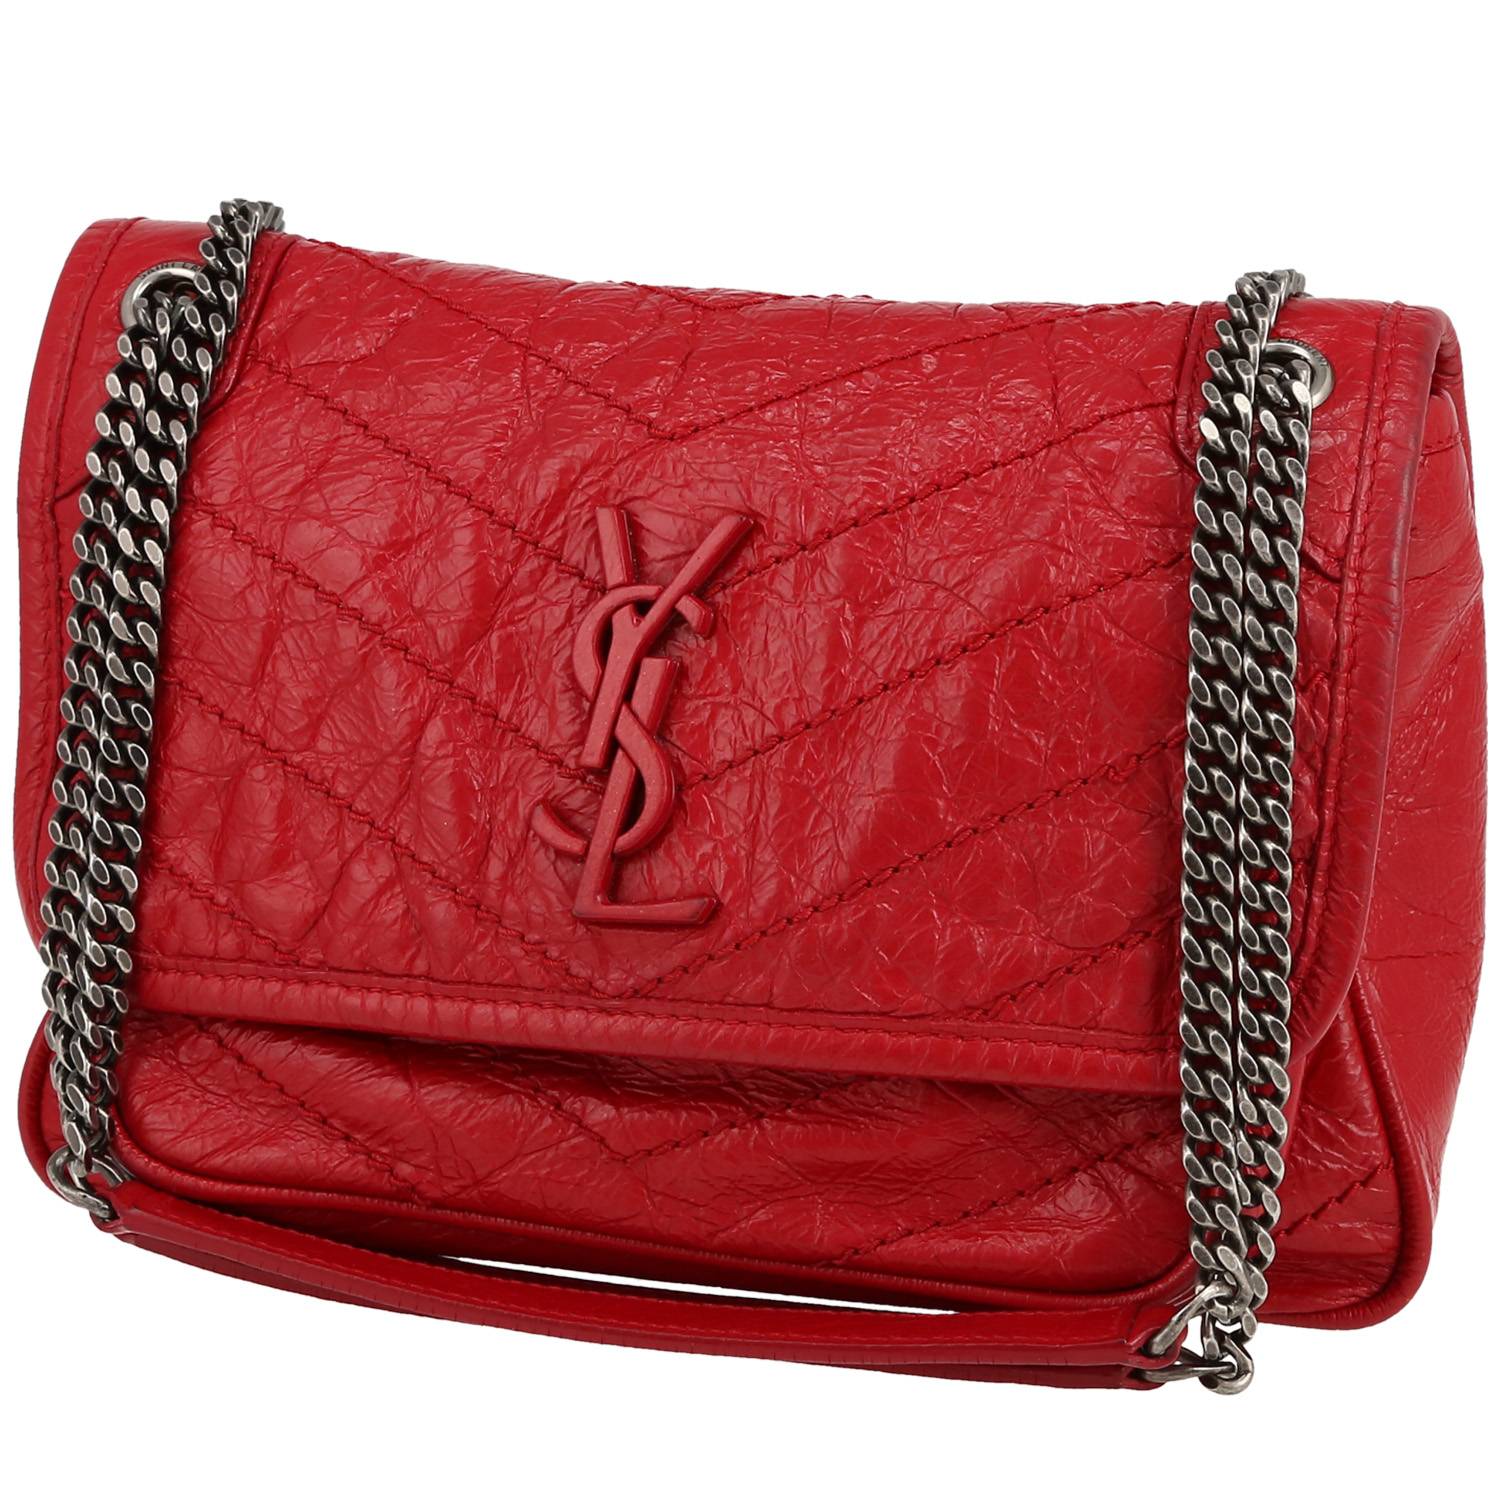 Niki Baby Shoulder Bag In Chevron Quilted Leather